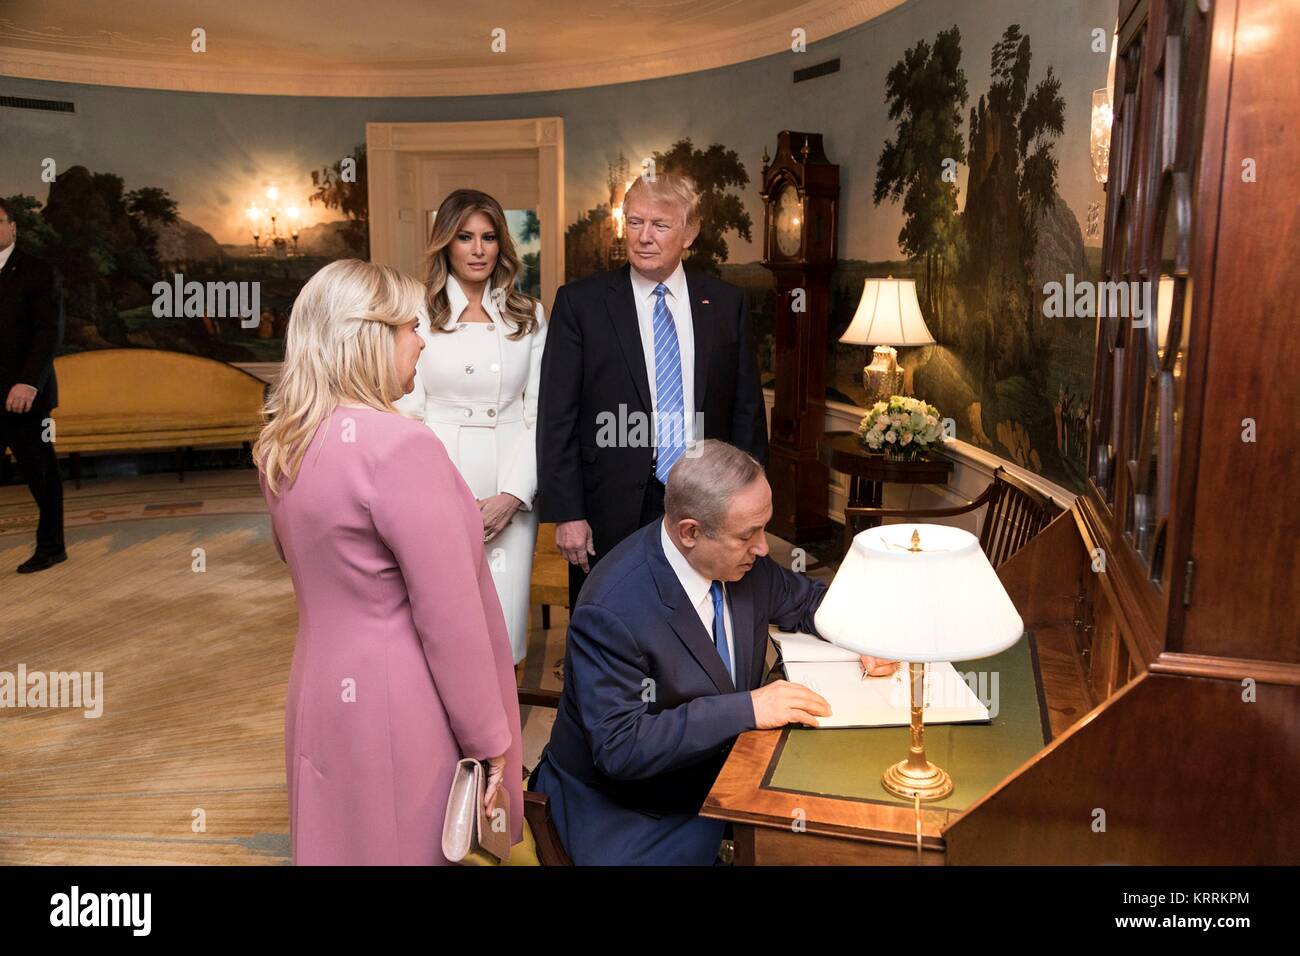 U.S. President Donald Trump and First Lady Melania Trump accompany Israeli Prime Minister Benjamin Netanyahu and wife Sara Netanyahu as they sign the guest book at the White House Diplomatic Reception Room February 15, 2017 in Washington, DC. Stock Photo